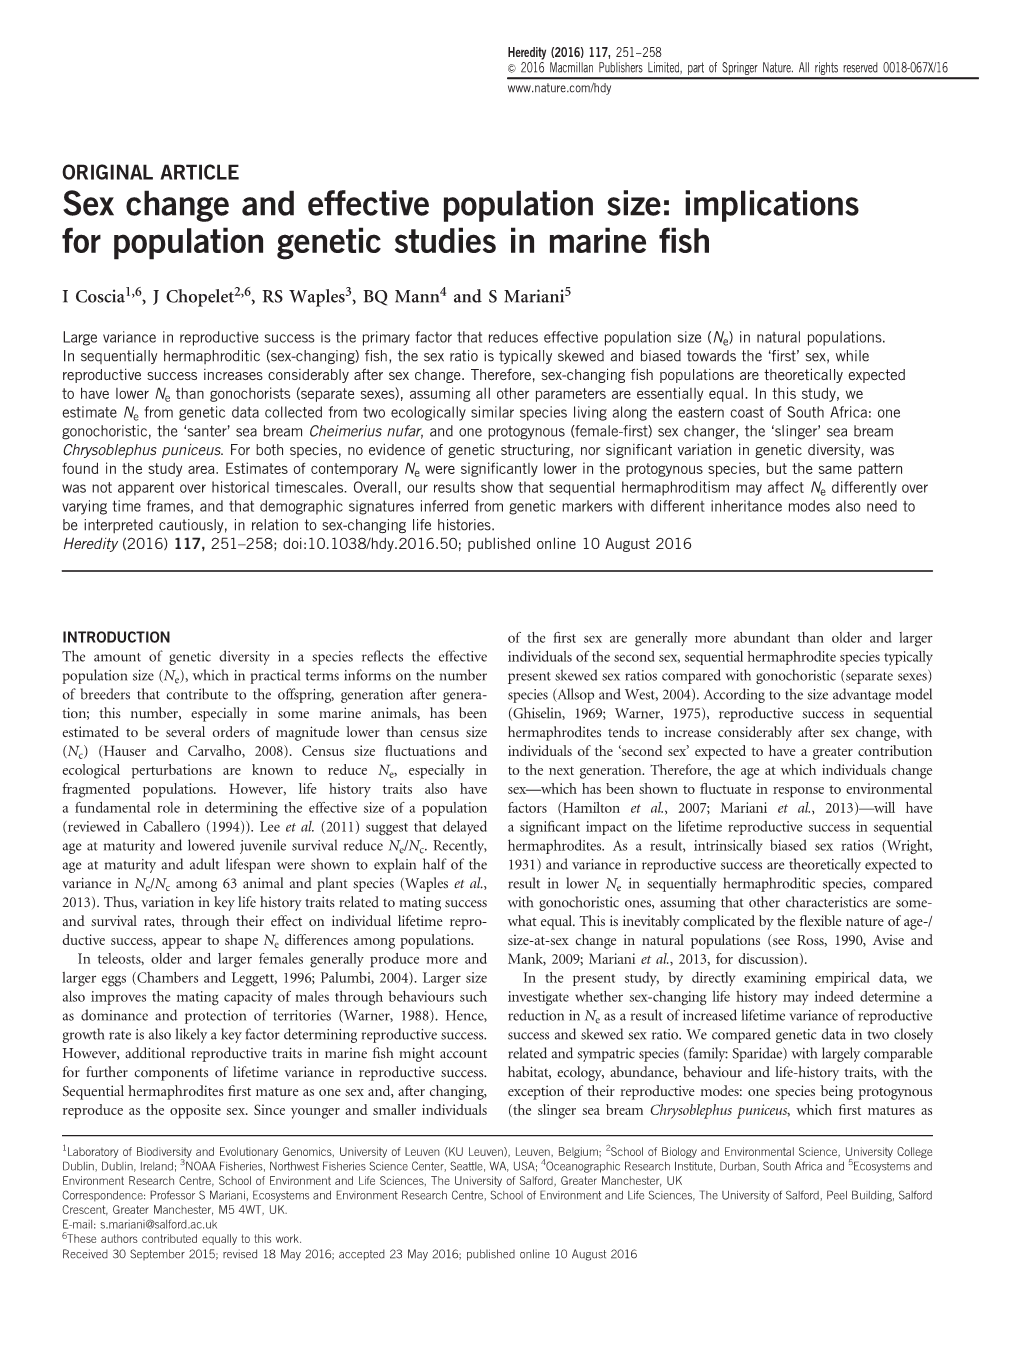 Sex Change and Effective Population Size: Implications for Population Genetic Studies in Marine ﬁsh